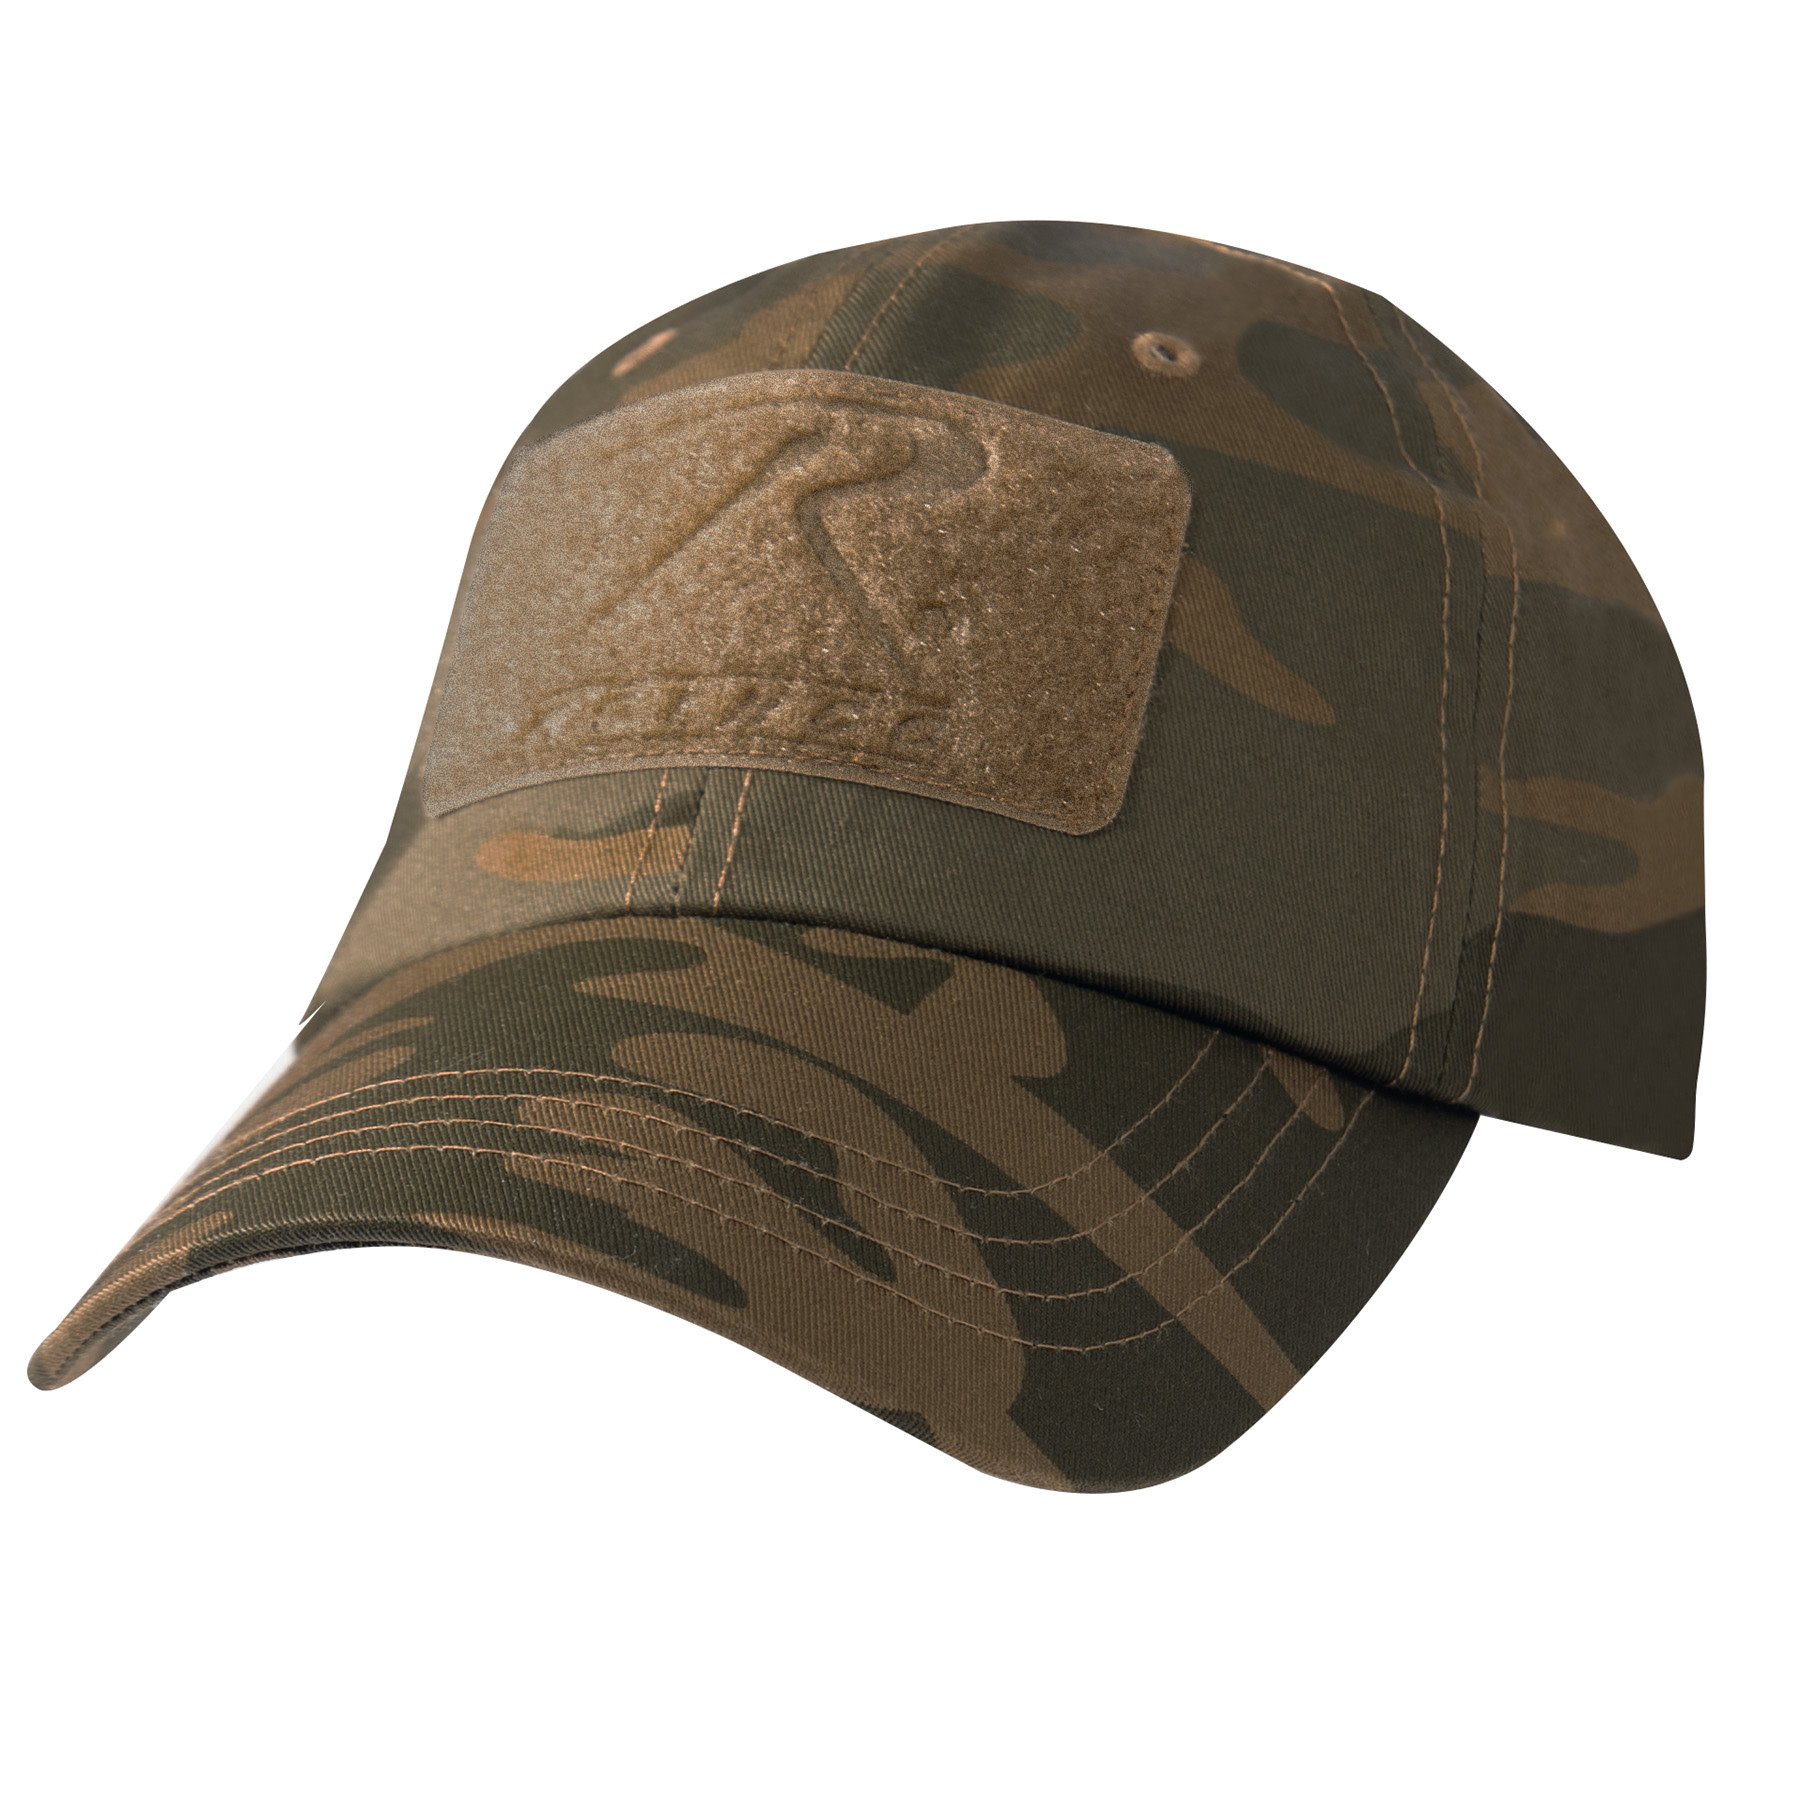 Rothco Coyote Camo Velcro Patch Tactical Cap - Army Supply Store Military